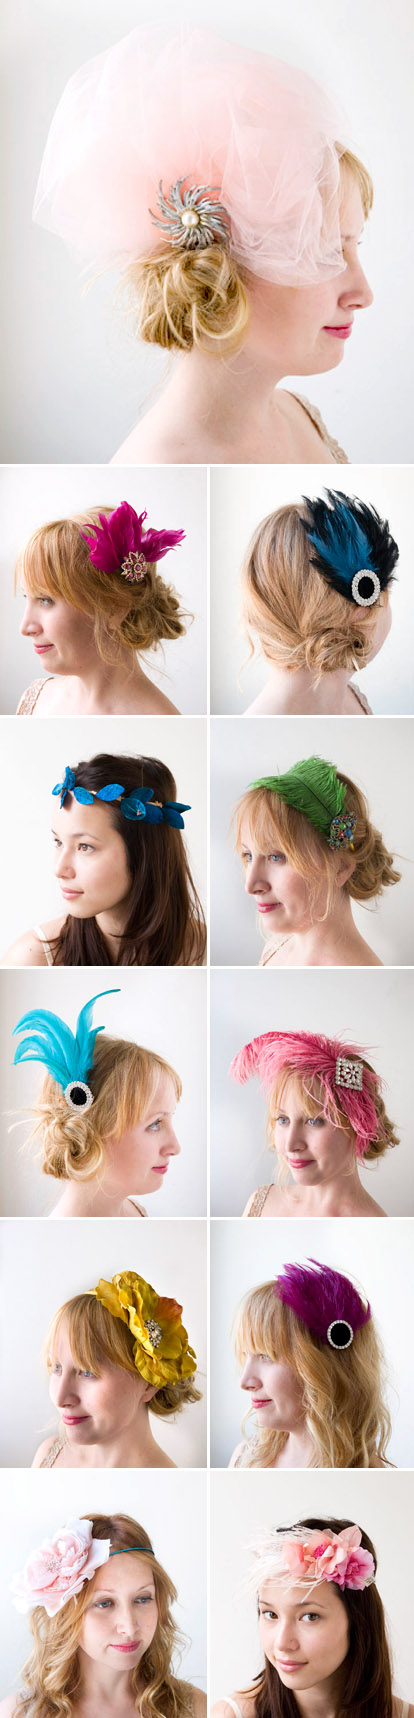 Colorful Alternative Hair Accessories from  | Junebug Weddings